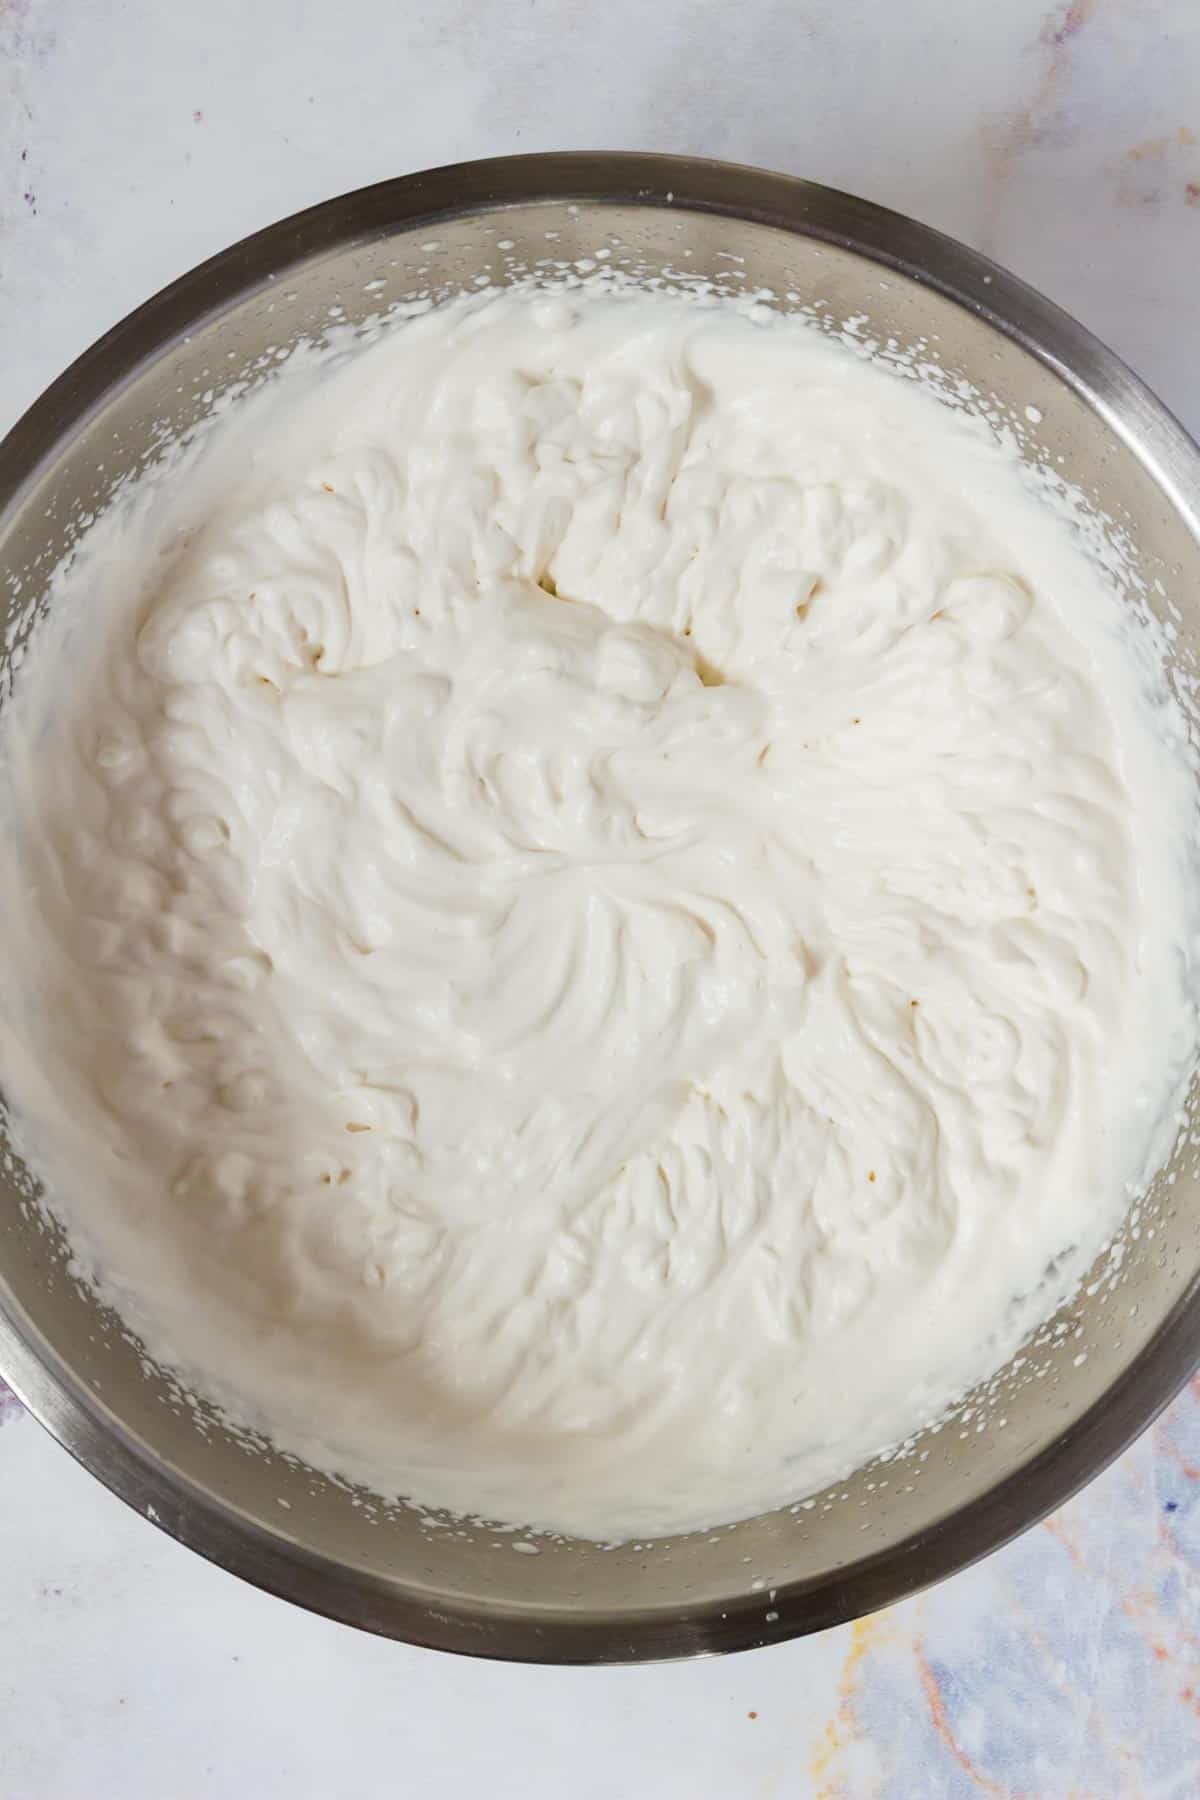 Whipping cream in a chilled mixing bowl.